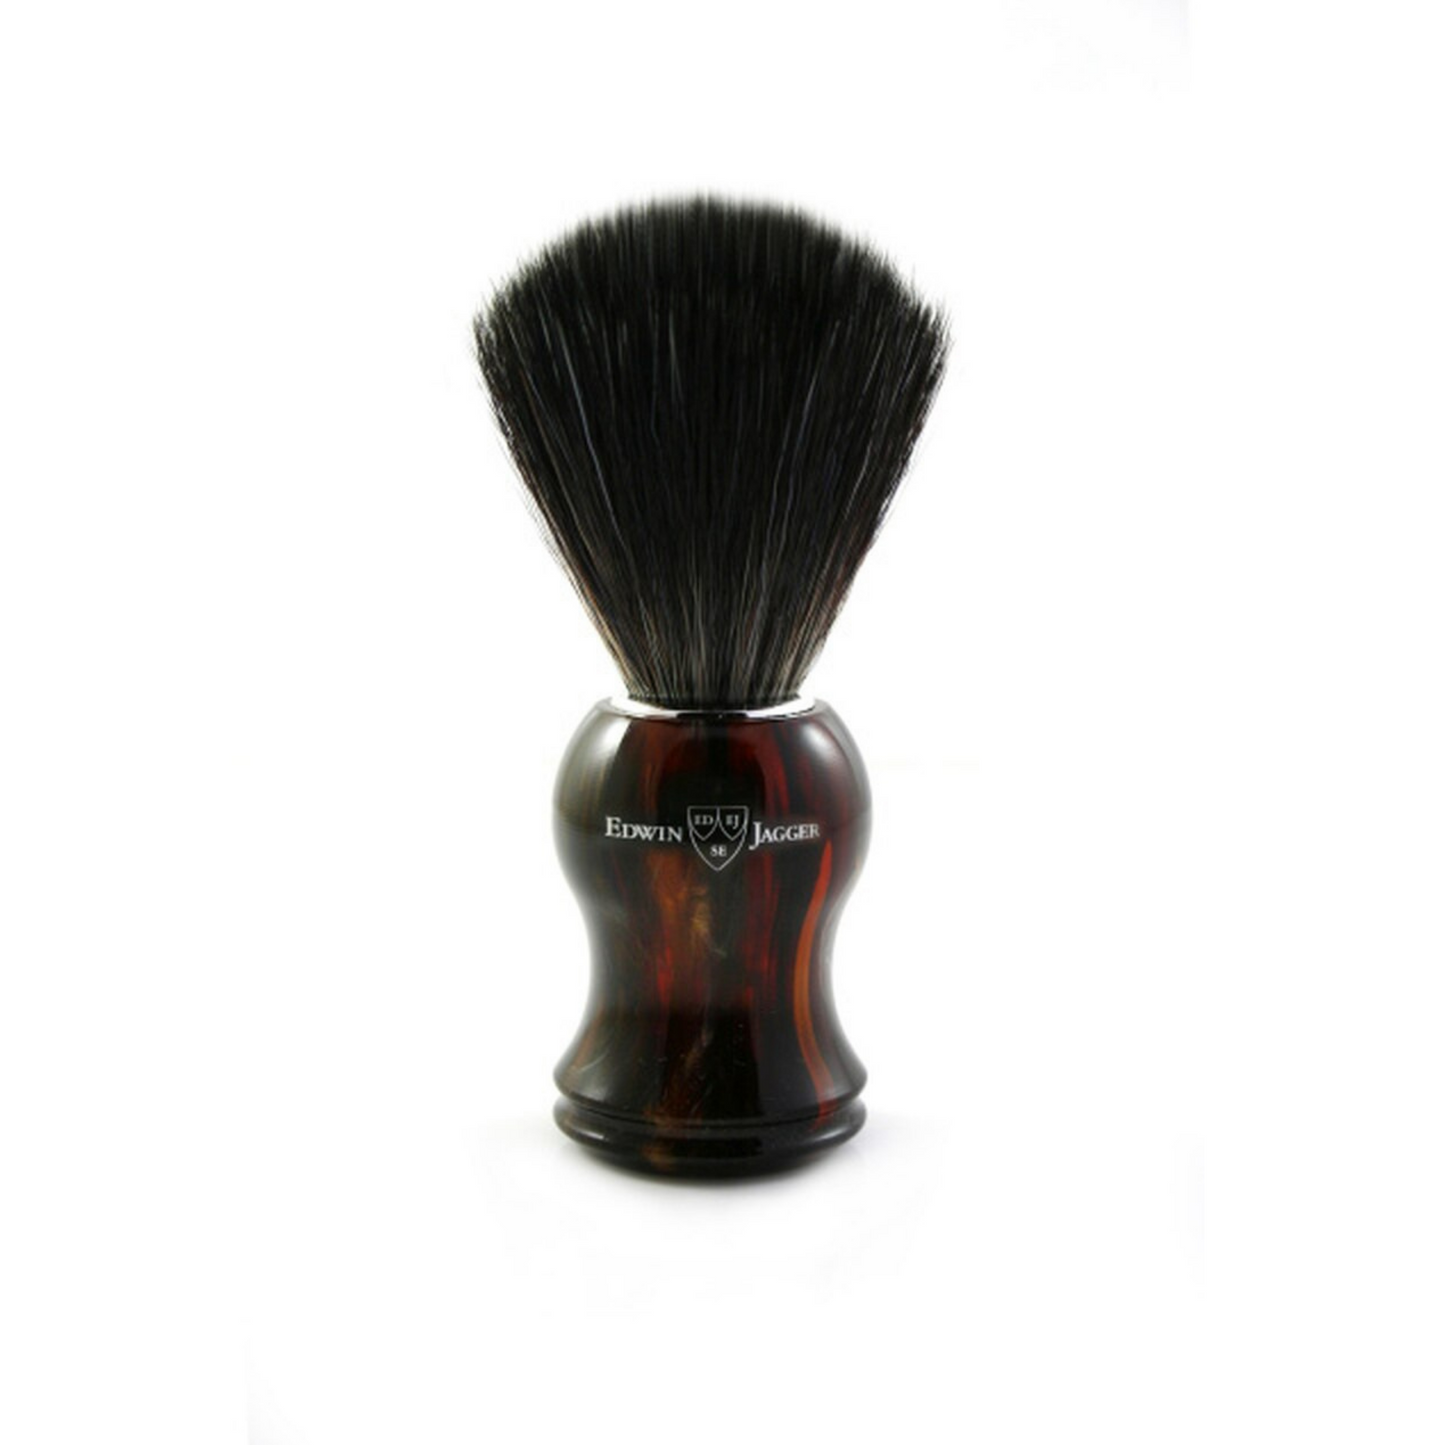 Primary image of Tortoise Black Synthetic Shave Brush